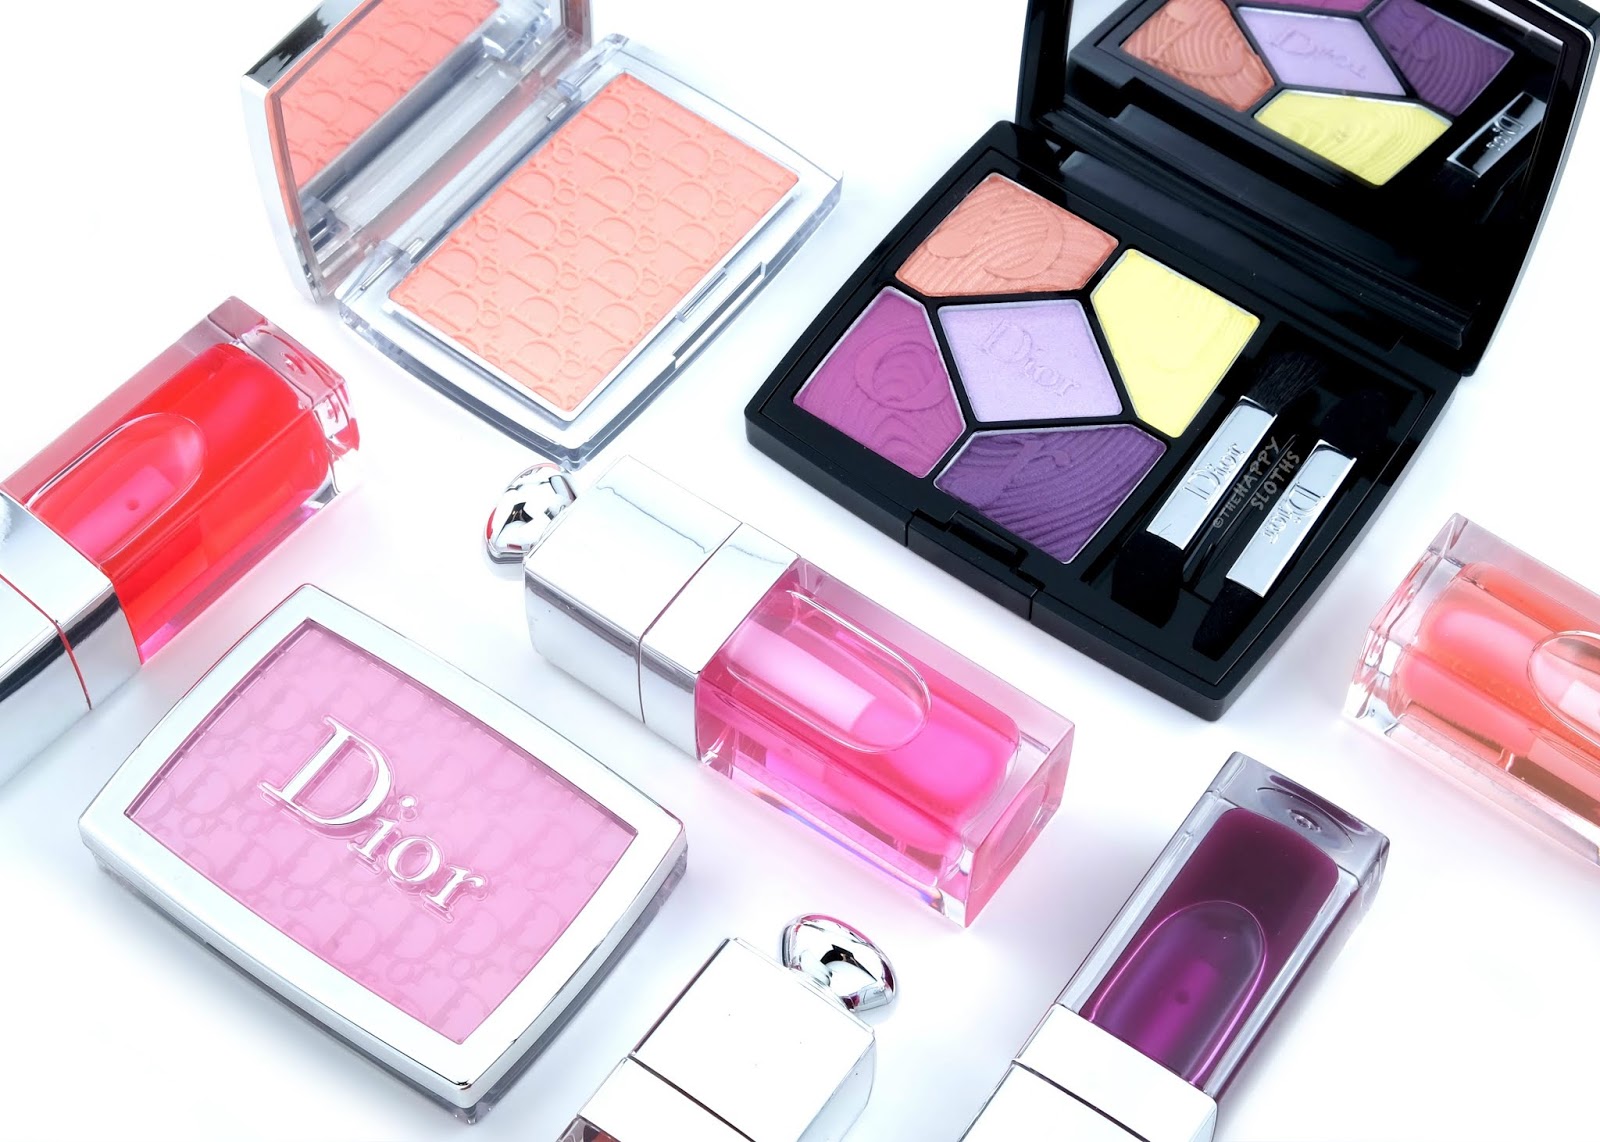 Dior  Spring 2020 Glow Vibes Collection: Review and Swatches